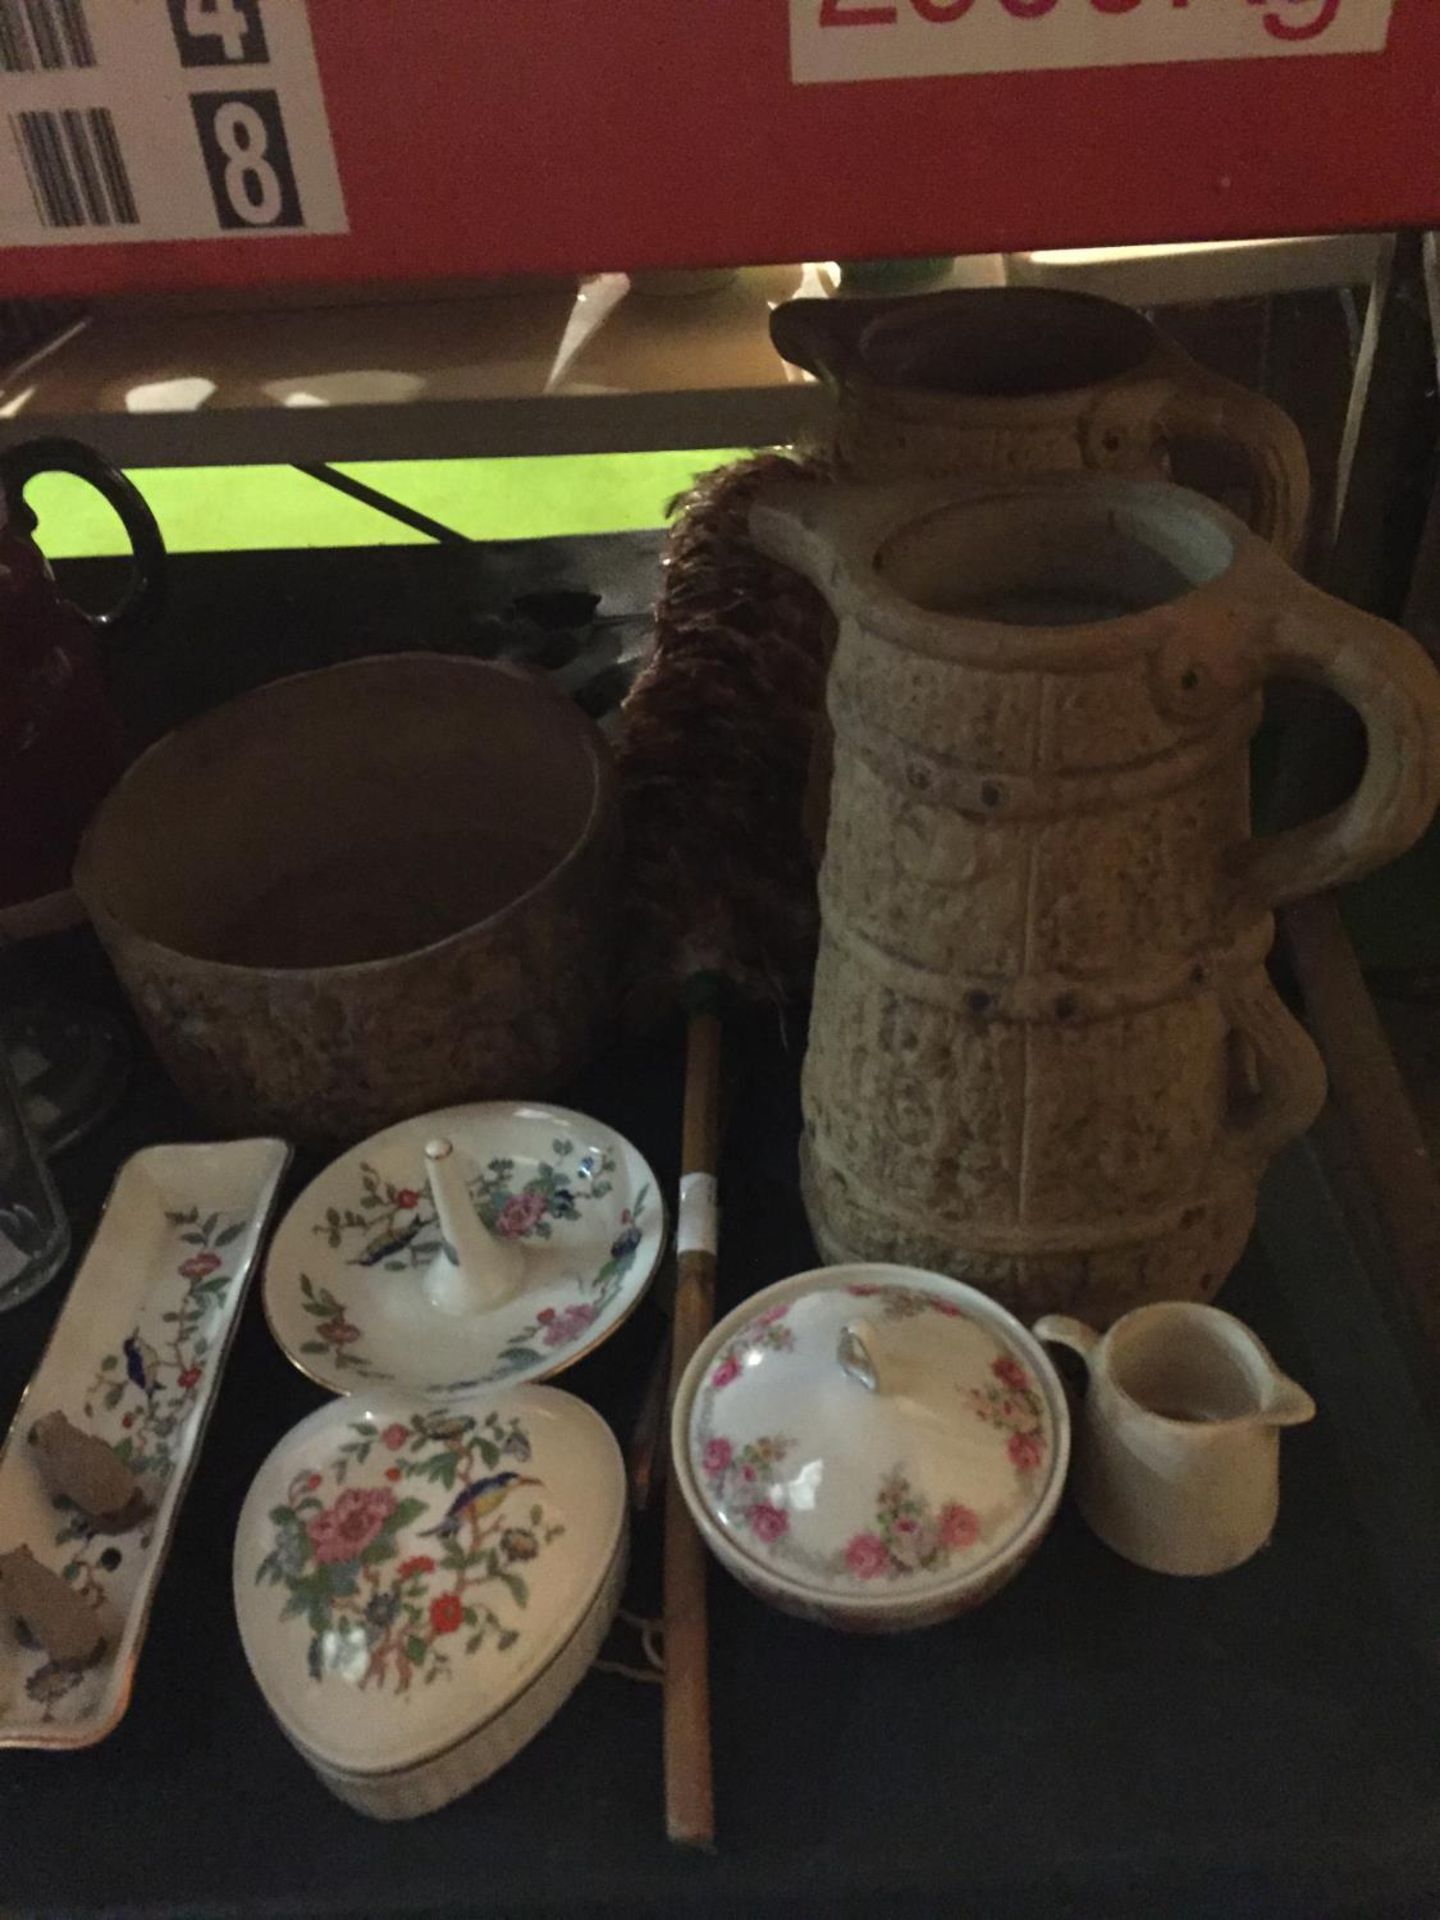 A LARGE AMOUNT OF COLLECTABLES TO INCLUDE STUDIO POTTERY JUGS, GLASS VASES, STONEWARE ITEMS, - Image 2 of 3